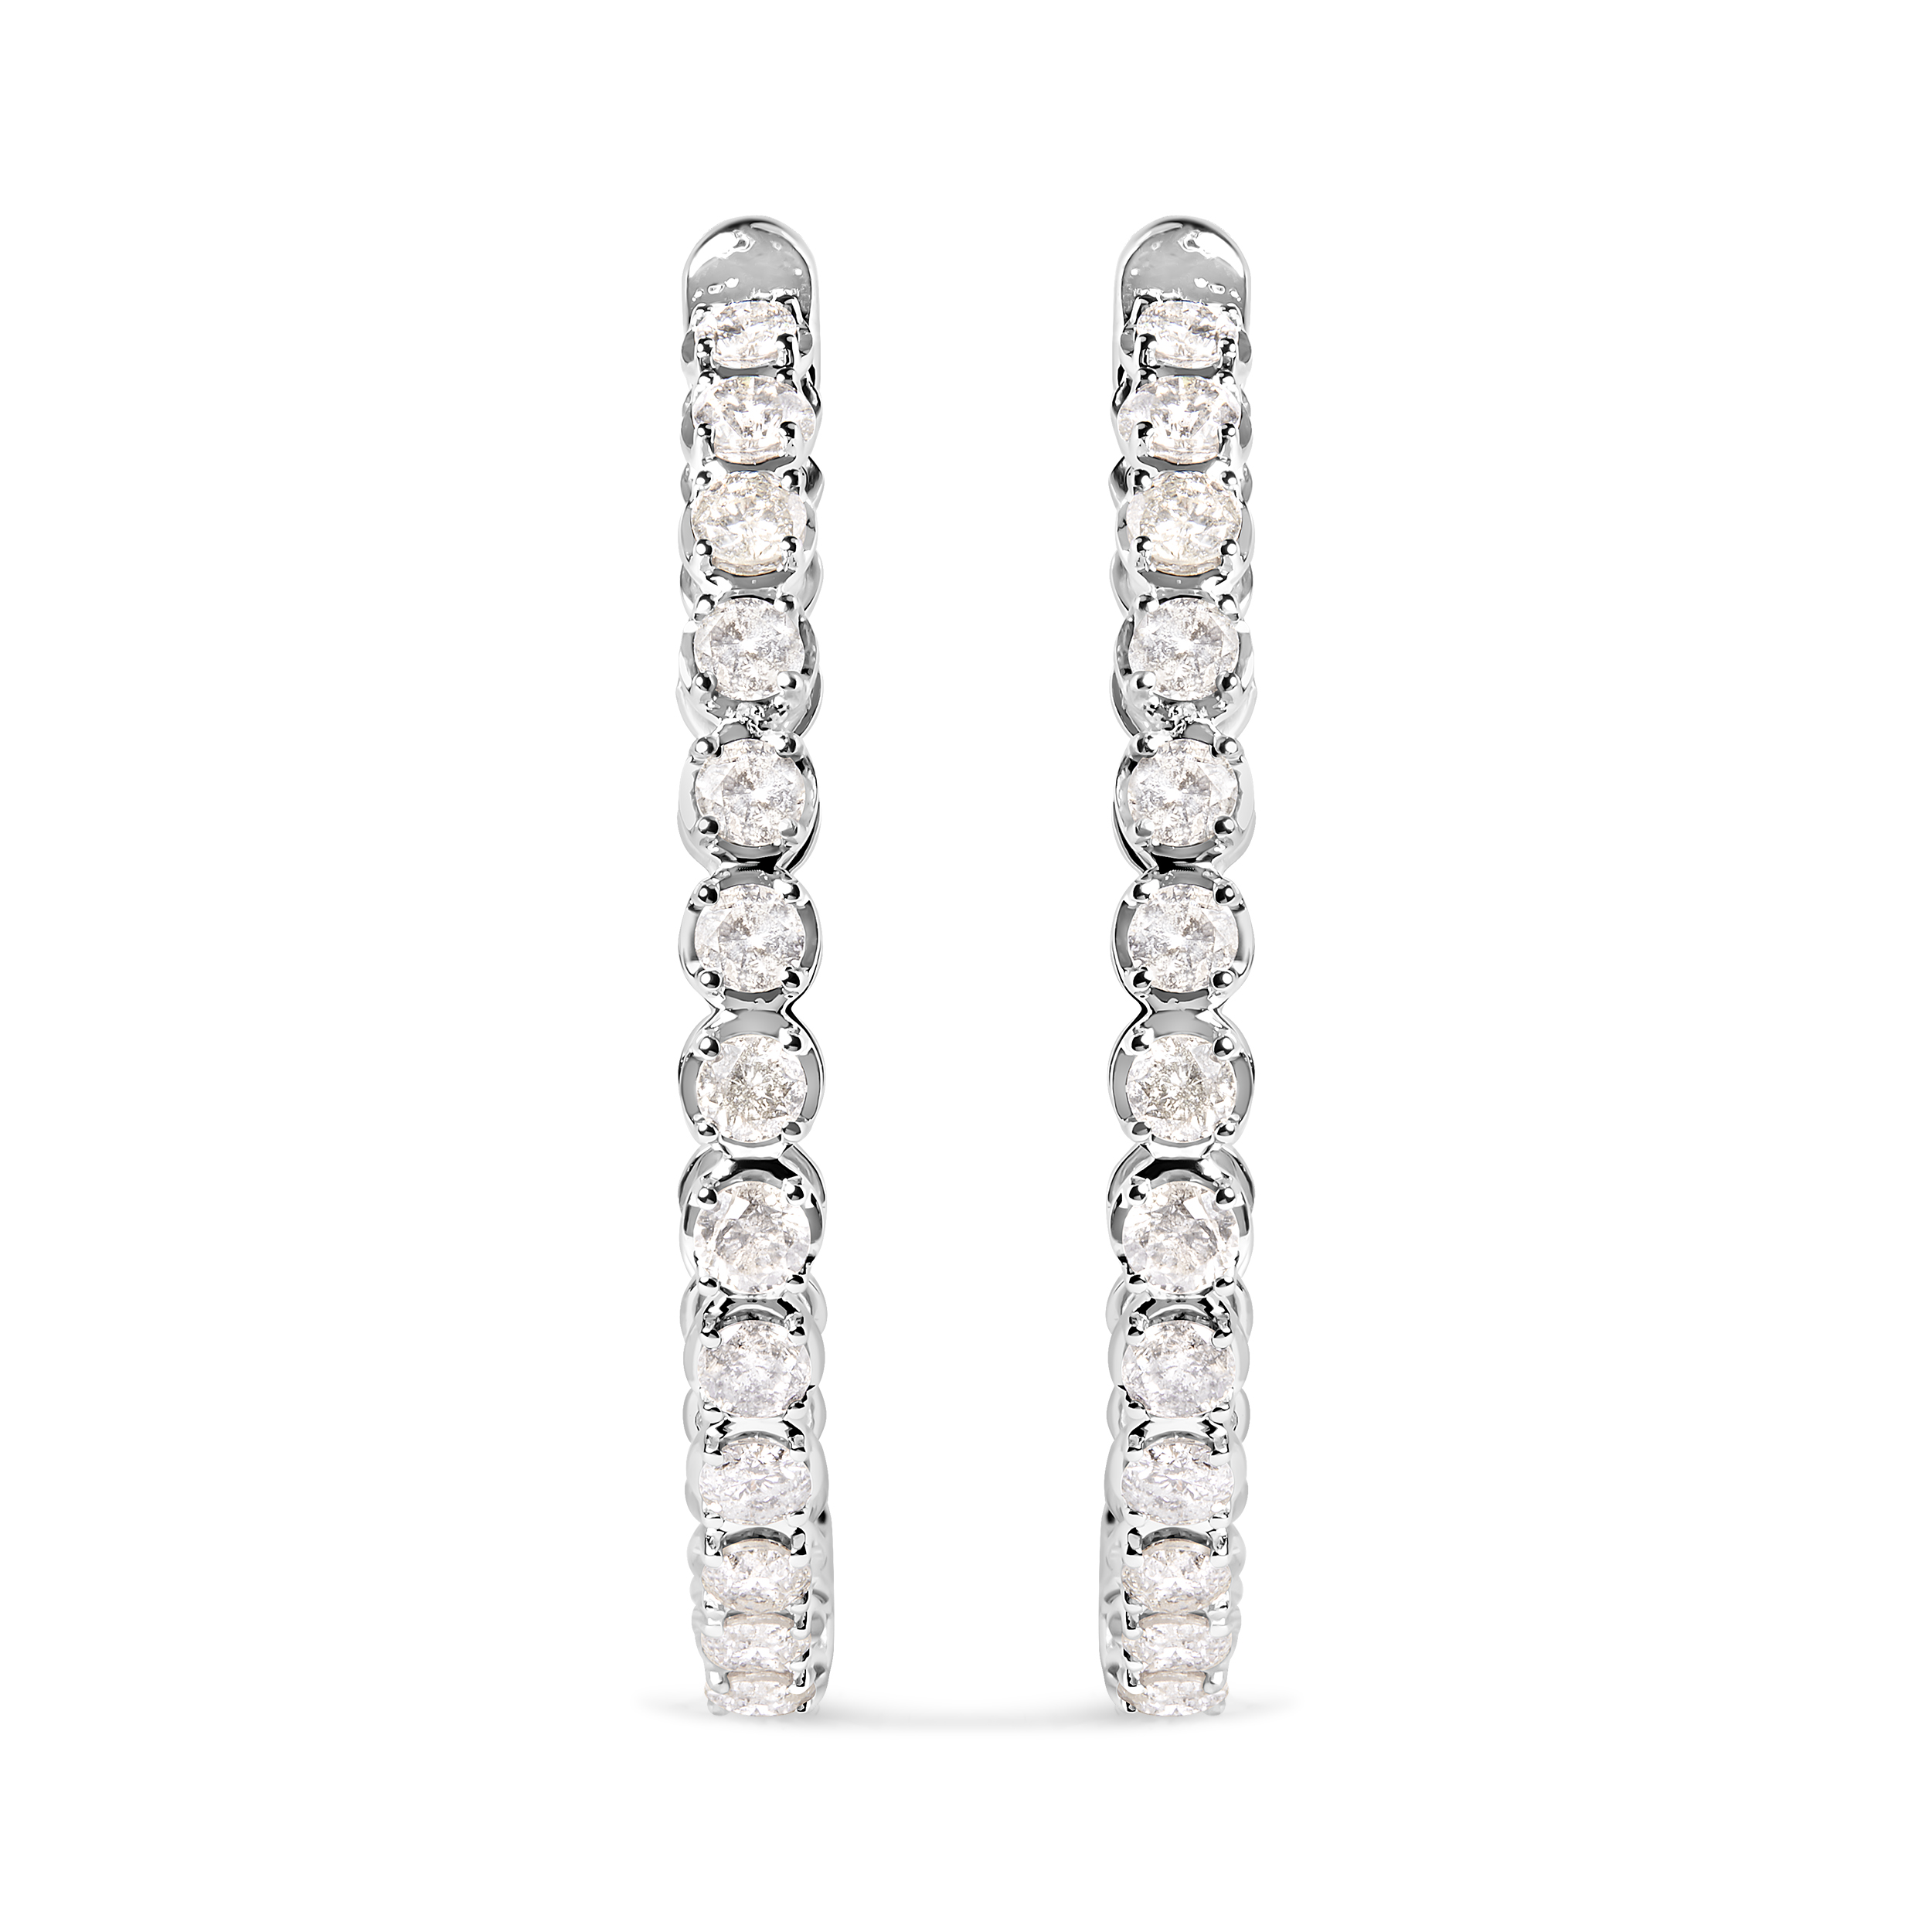 Haus of Brilliance Sterling Silver 7ct TDW Diamond Inside-Out Hoop Earring (I-J, I1-I2)